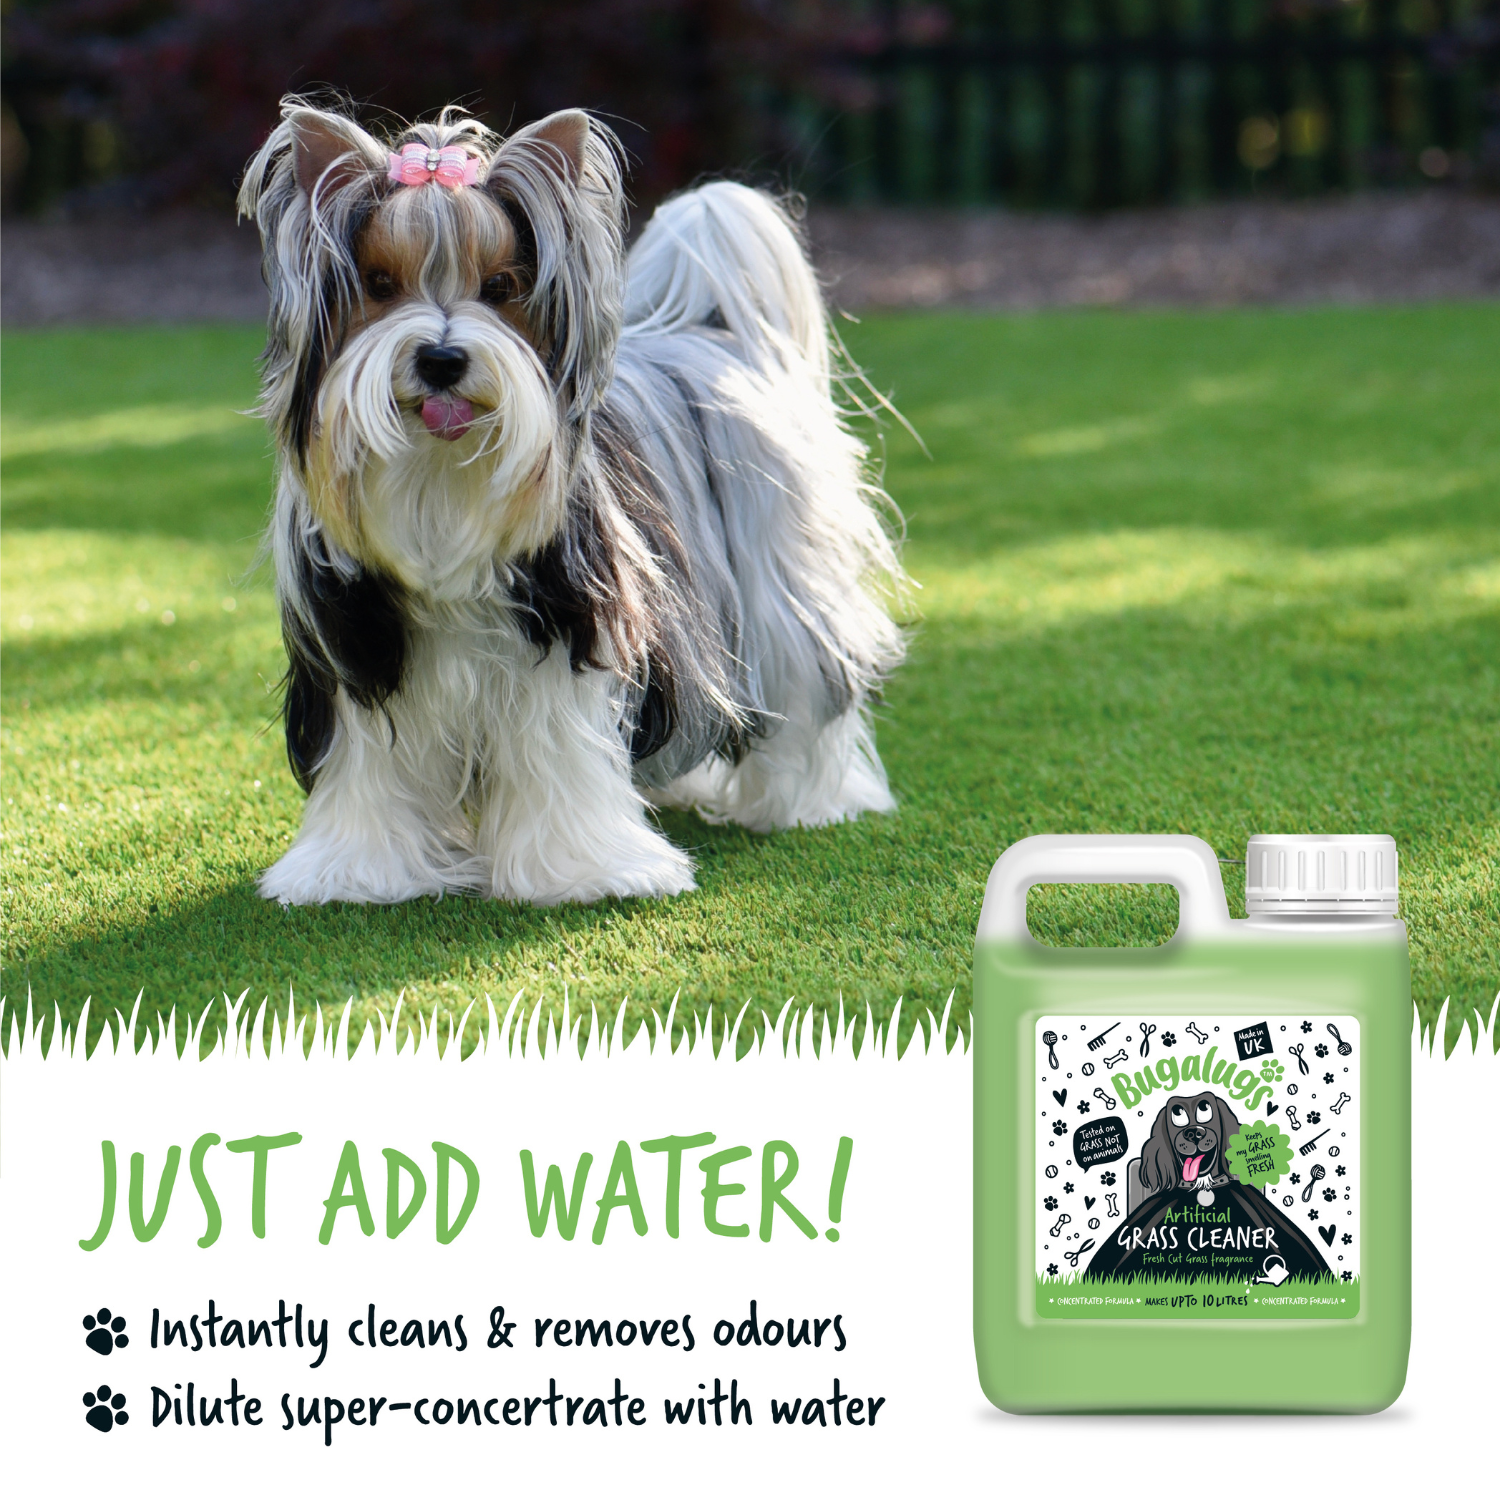 Bugalugs Artificial Grass Cleaner - Fresh Cut Grass Fragrance - Just add water - makes up to 10 litres